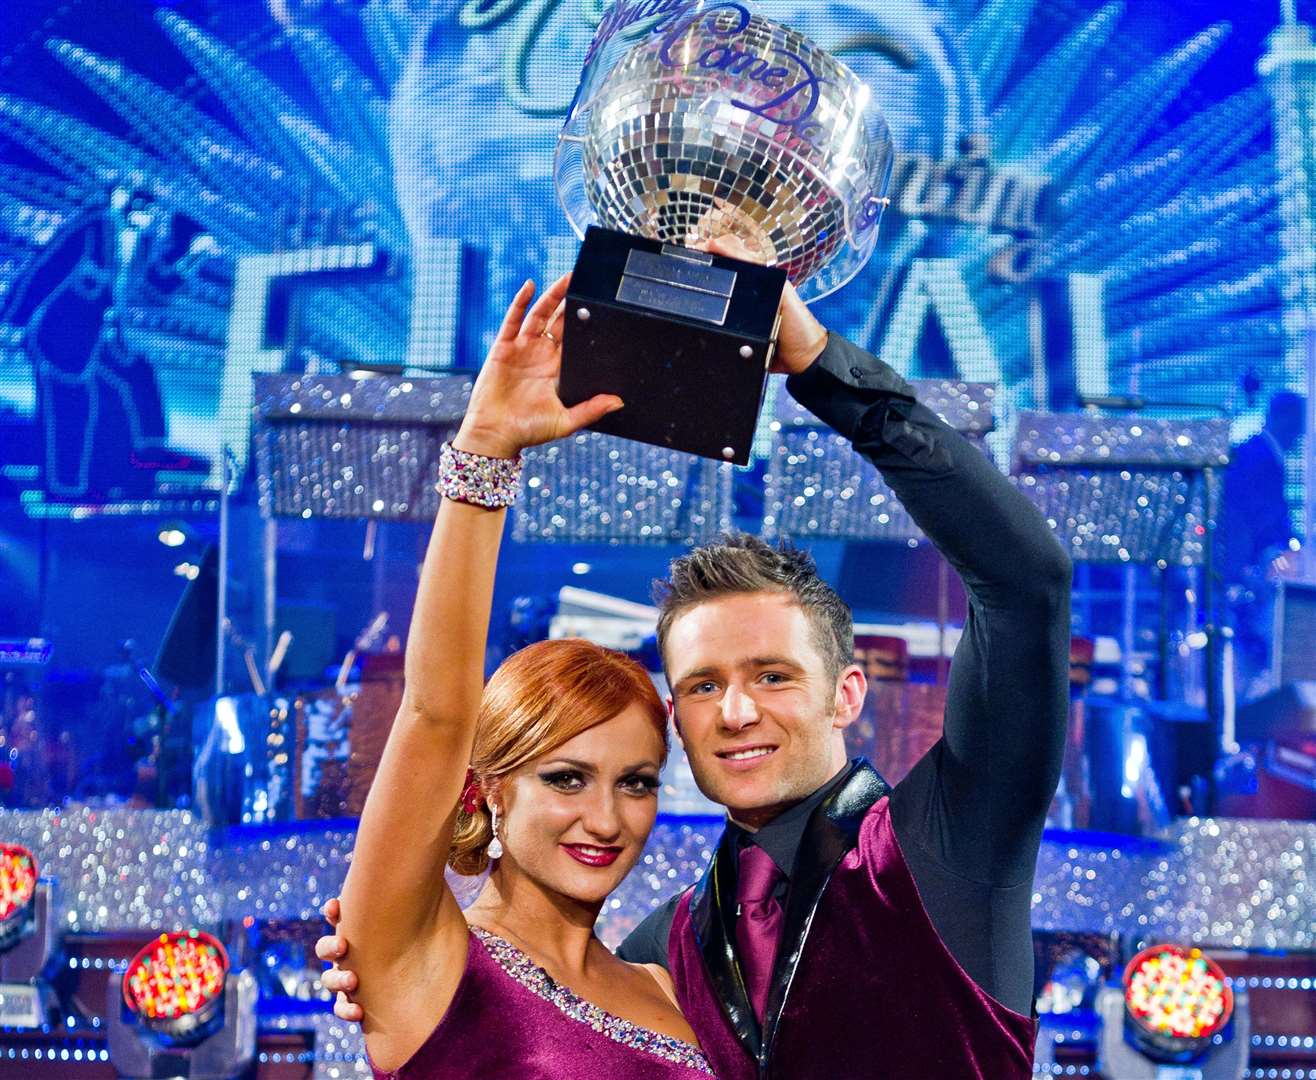 Harry Judd and Aliona Vilani lifted the Glitterball trophy in 2011. Picture: BBC / Guy Levy